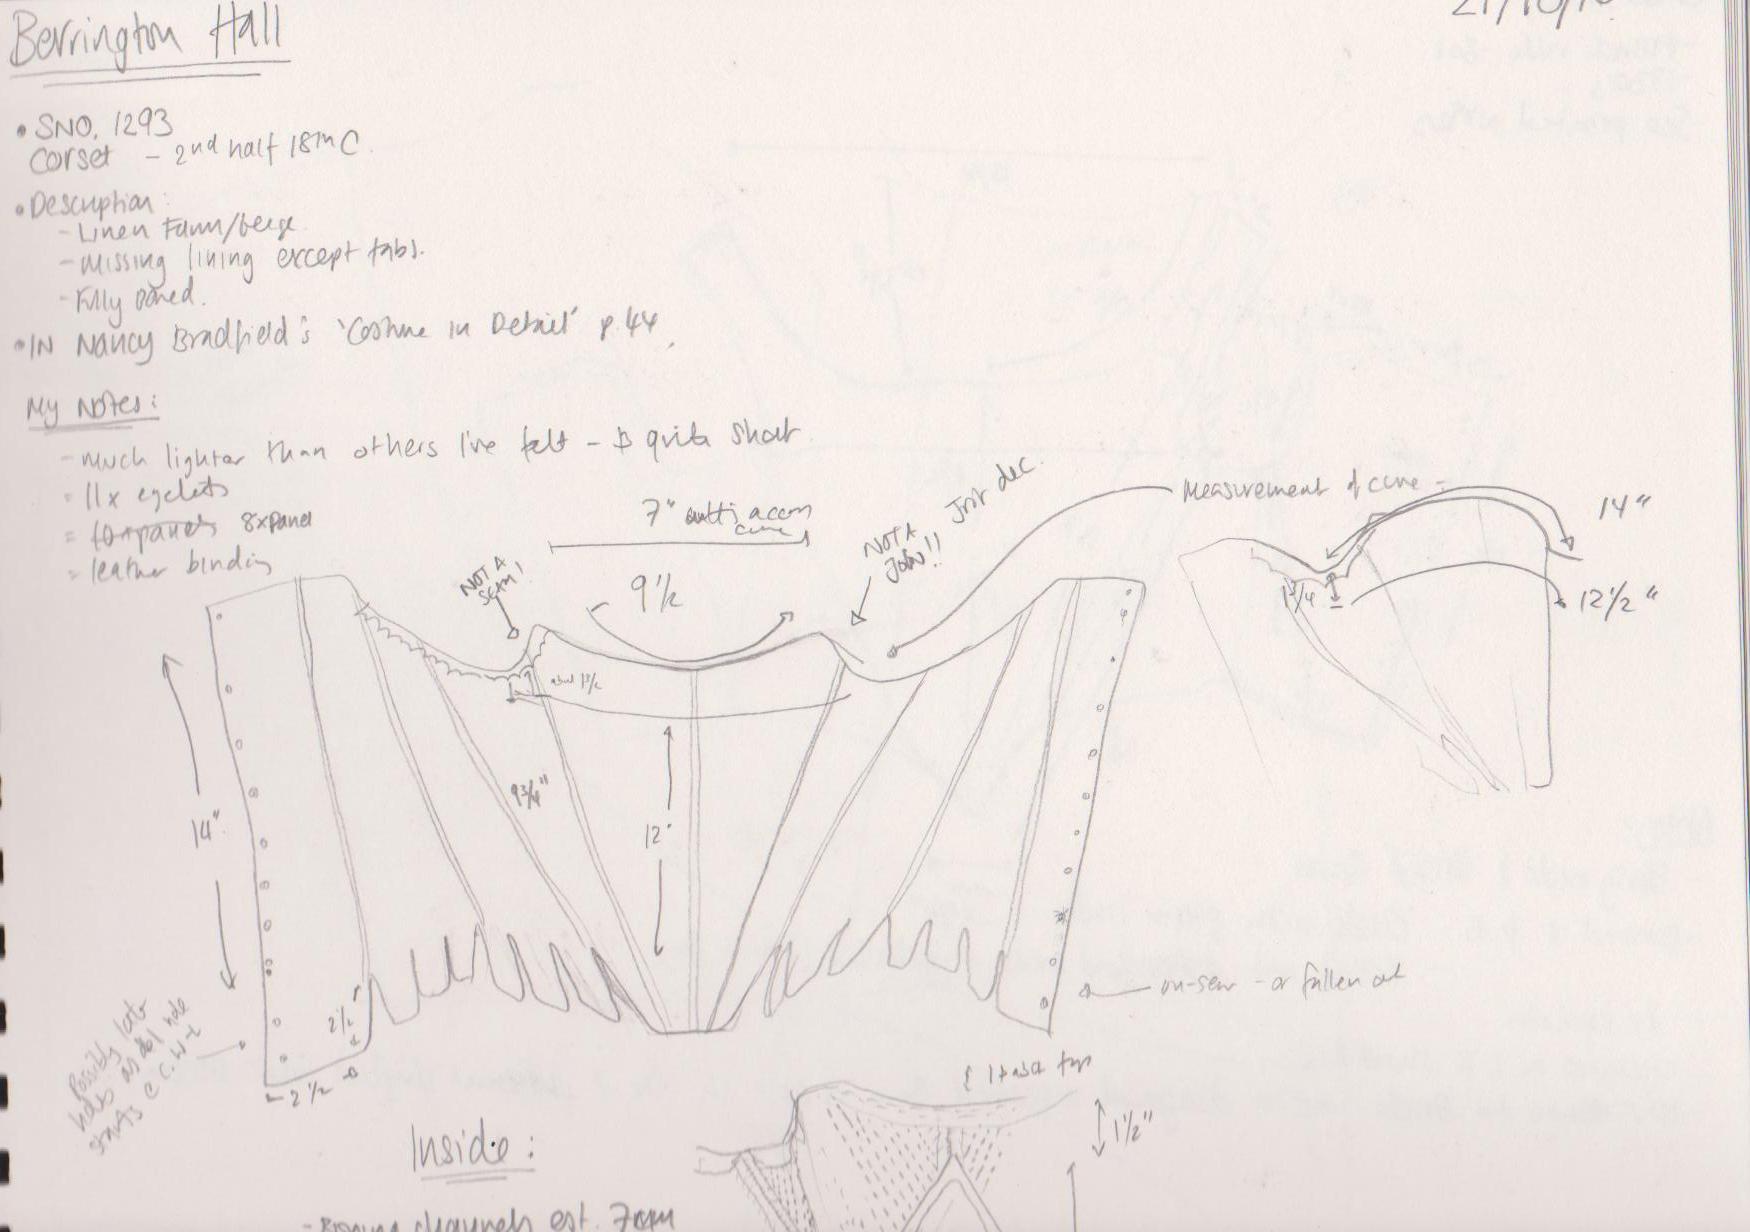 Notes from the museums sketches and drawings of costumes in the NT collections, 18th c corsets and stays research, replica stays and corsetry from the georgian period, handBound costume research into Stays, museum replicas 1700s, 18th c. underwear, historical costumes made to be based on museum items and replicas, theatre and film costumiers, made to measure historical costumes for theatre and re-enactment, bespoke 18thc garments, custom made historical costumes